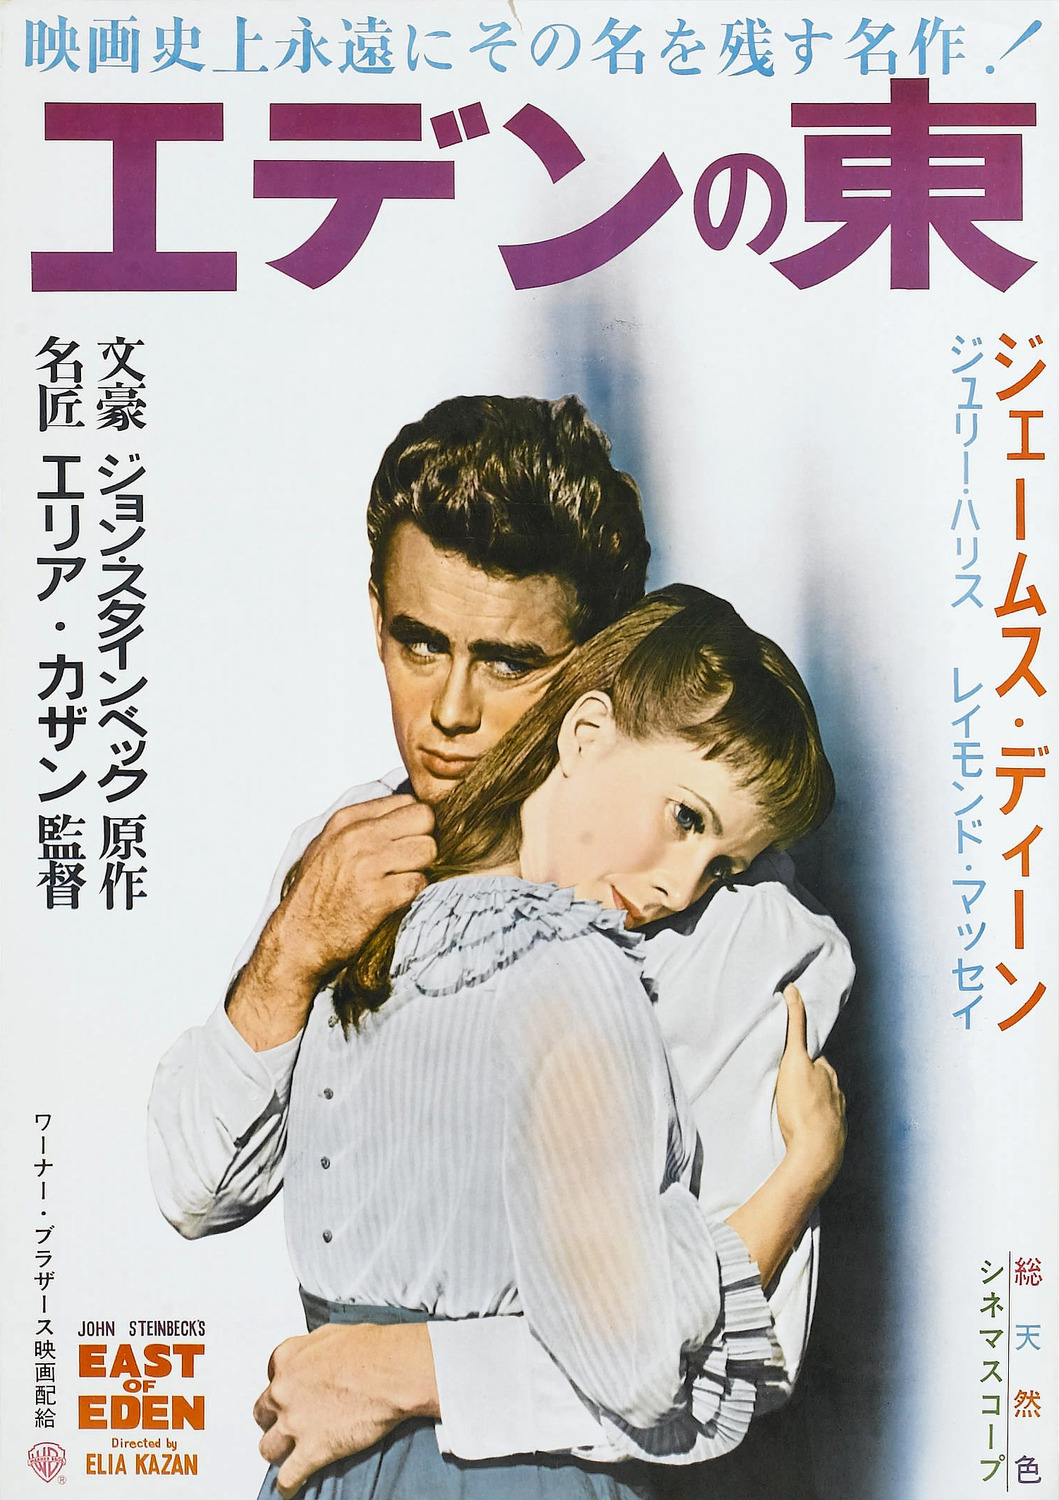 Extra Large Movie Poster Image for East of Eden (#14 of 15)